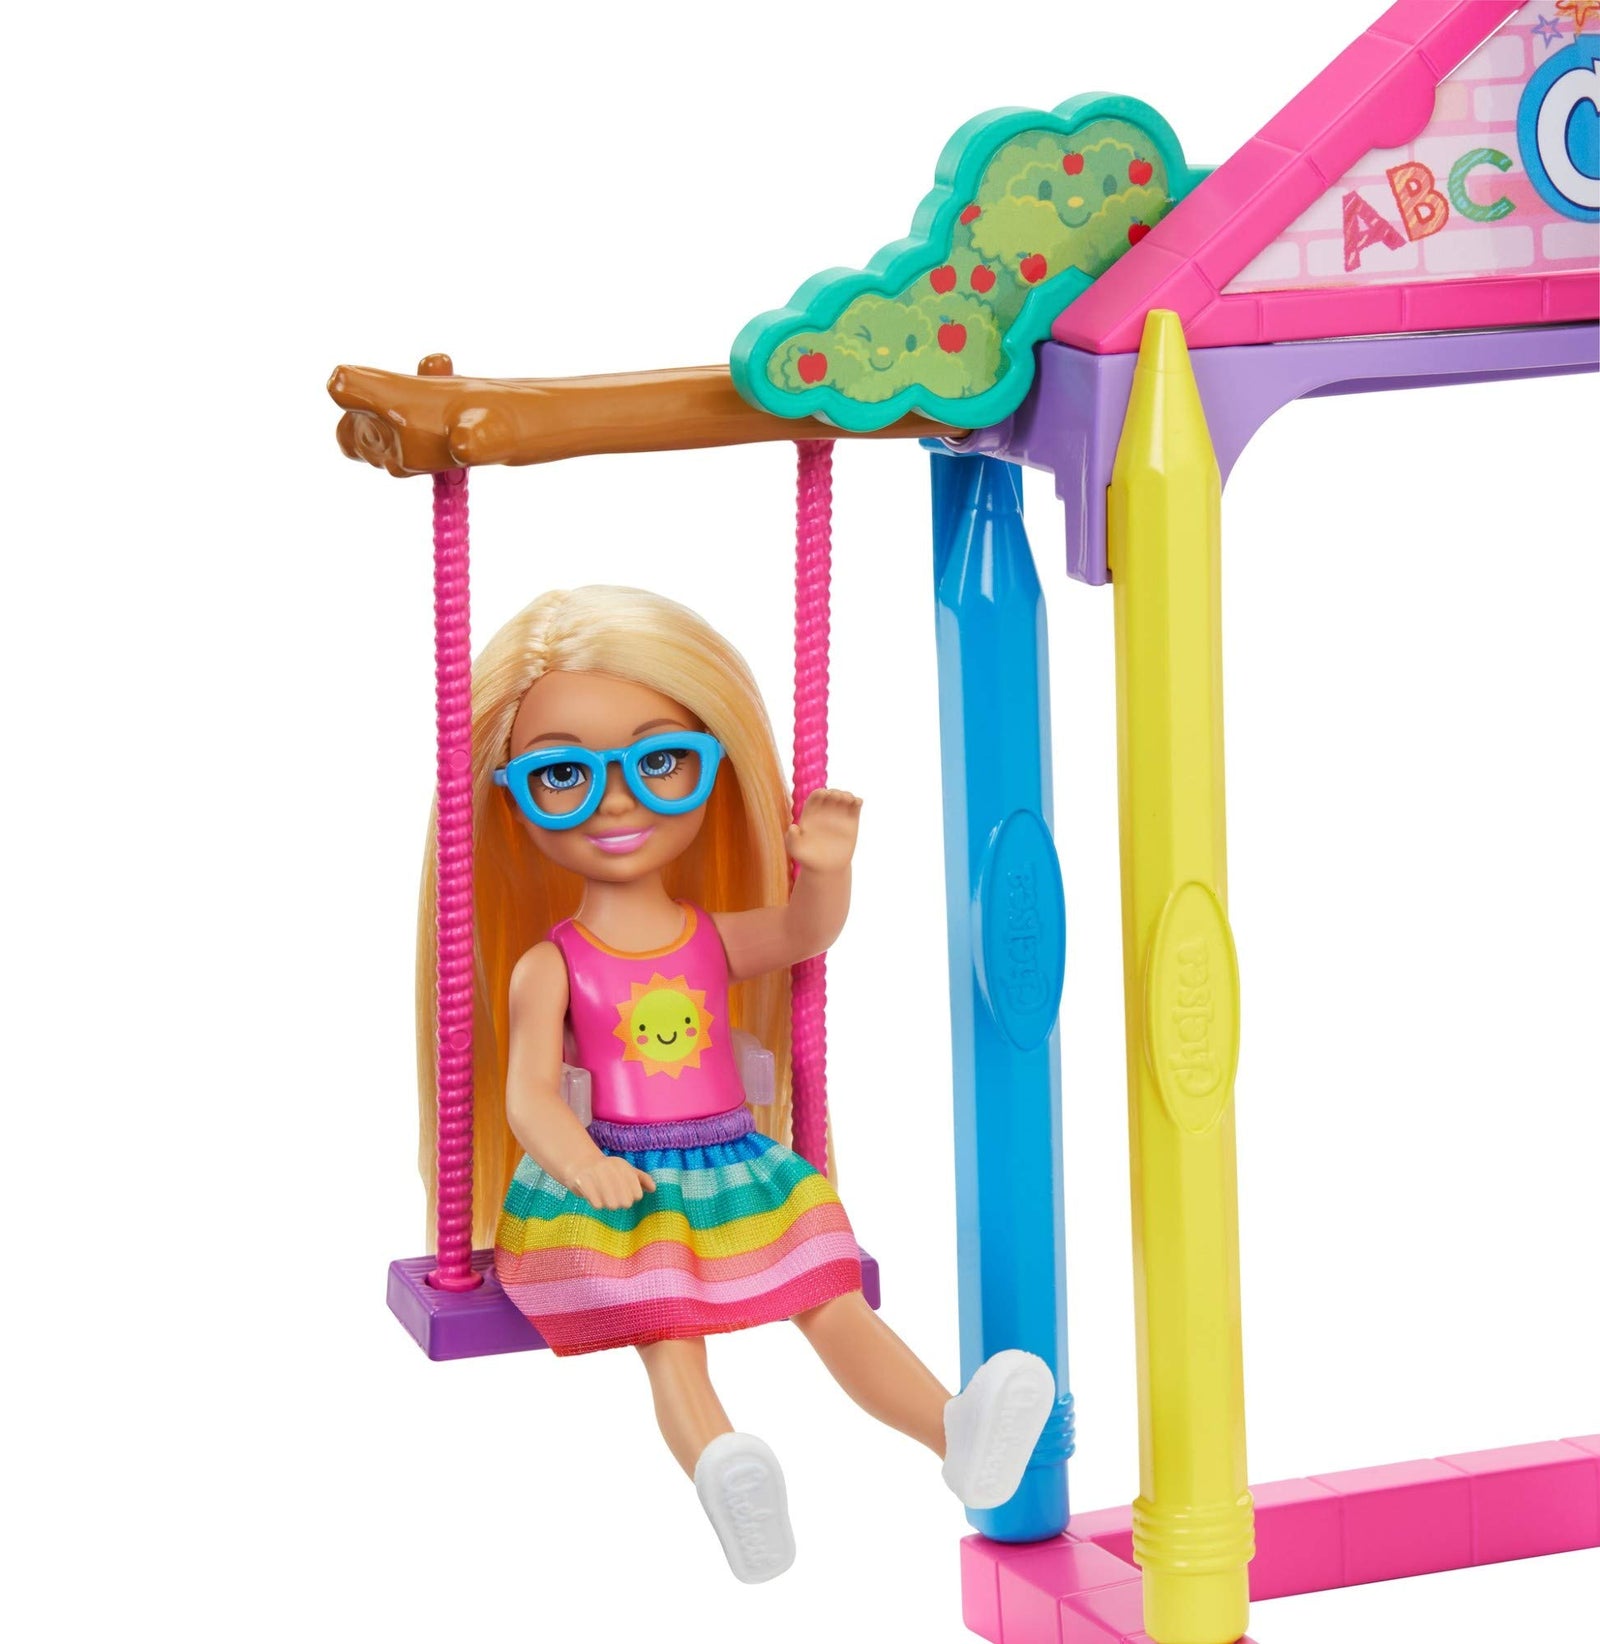 Barbie Club Chelsea Doll and School Playset, 6-inch Blonde, with Accessories, Gift for 3 to 7 Year Olds